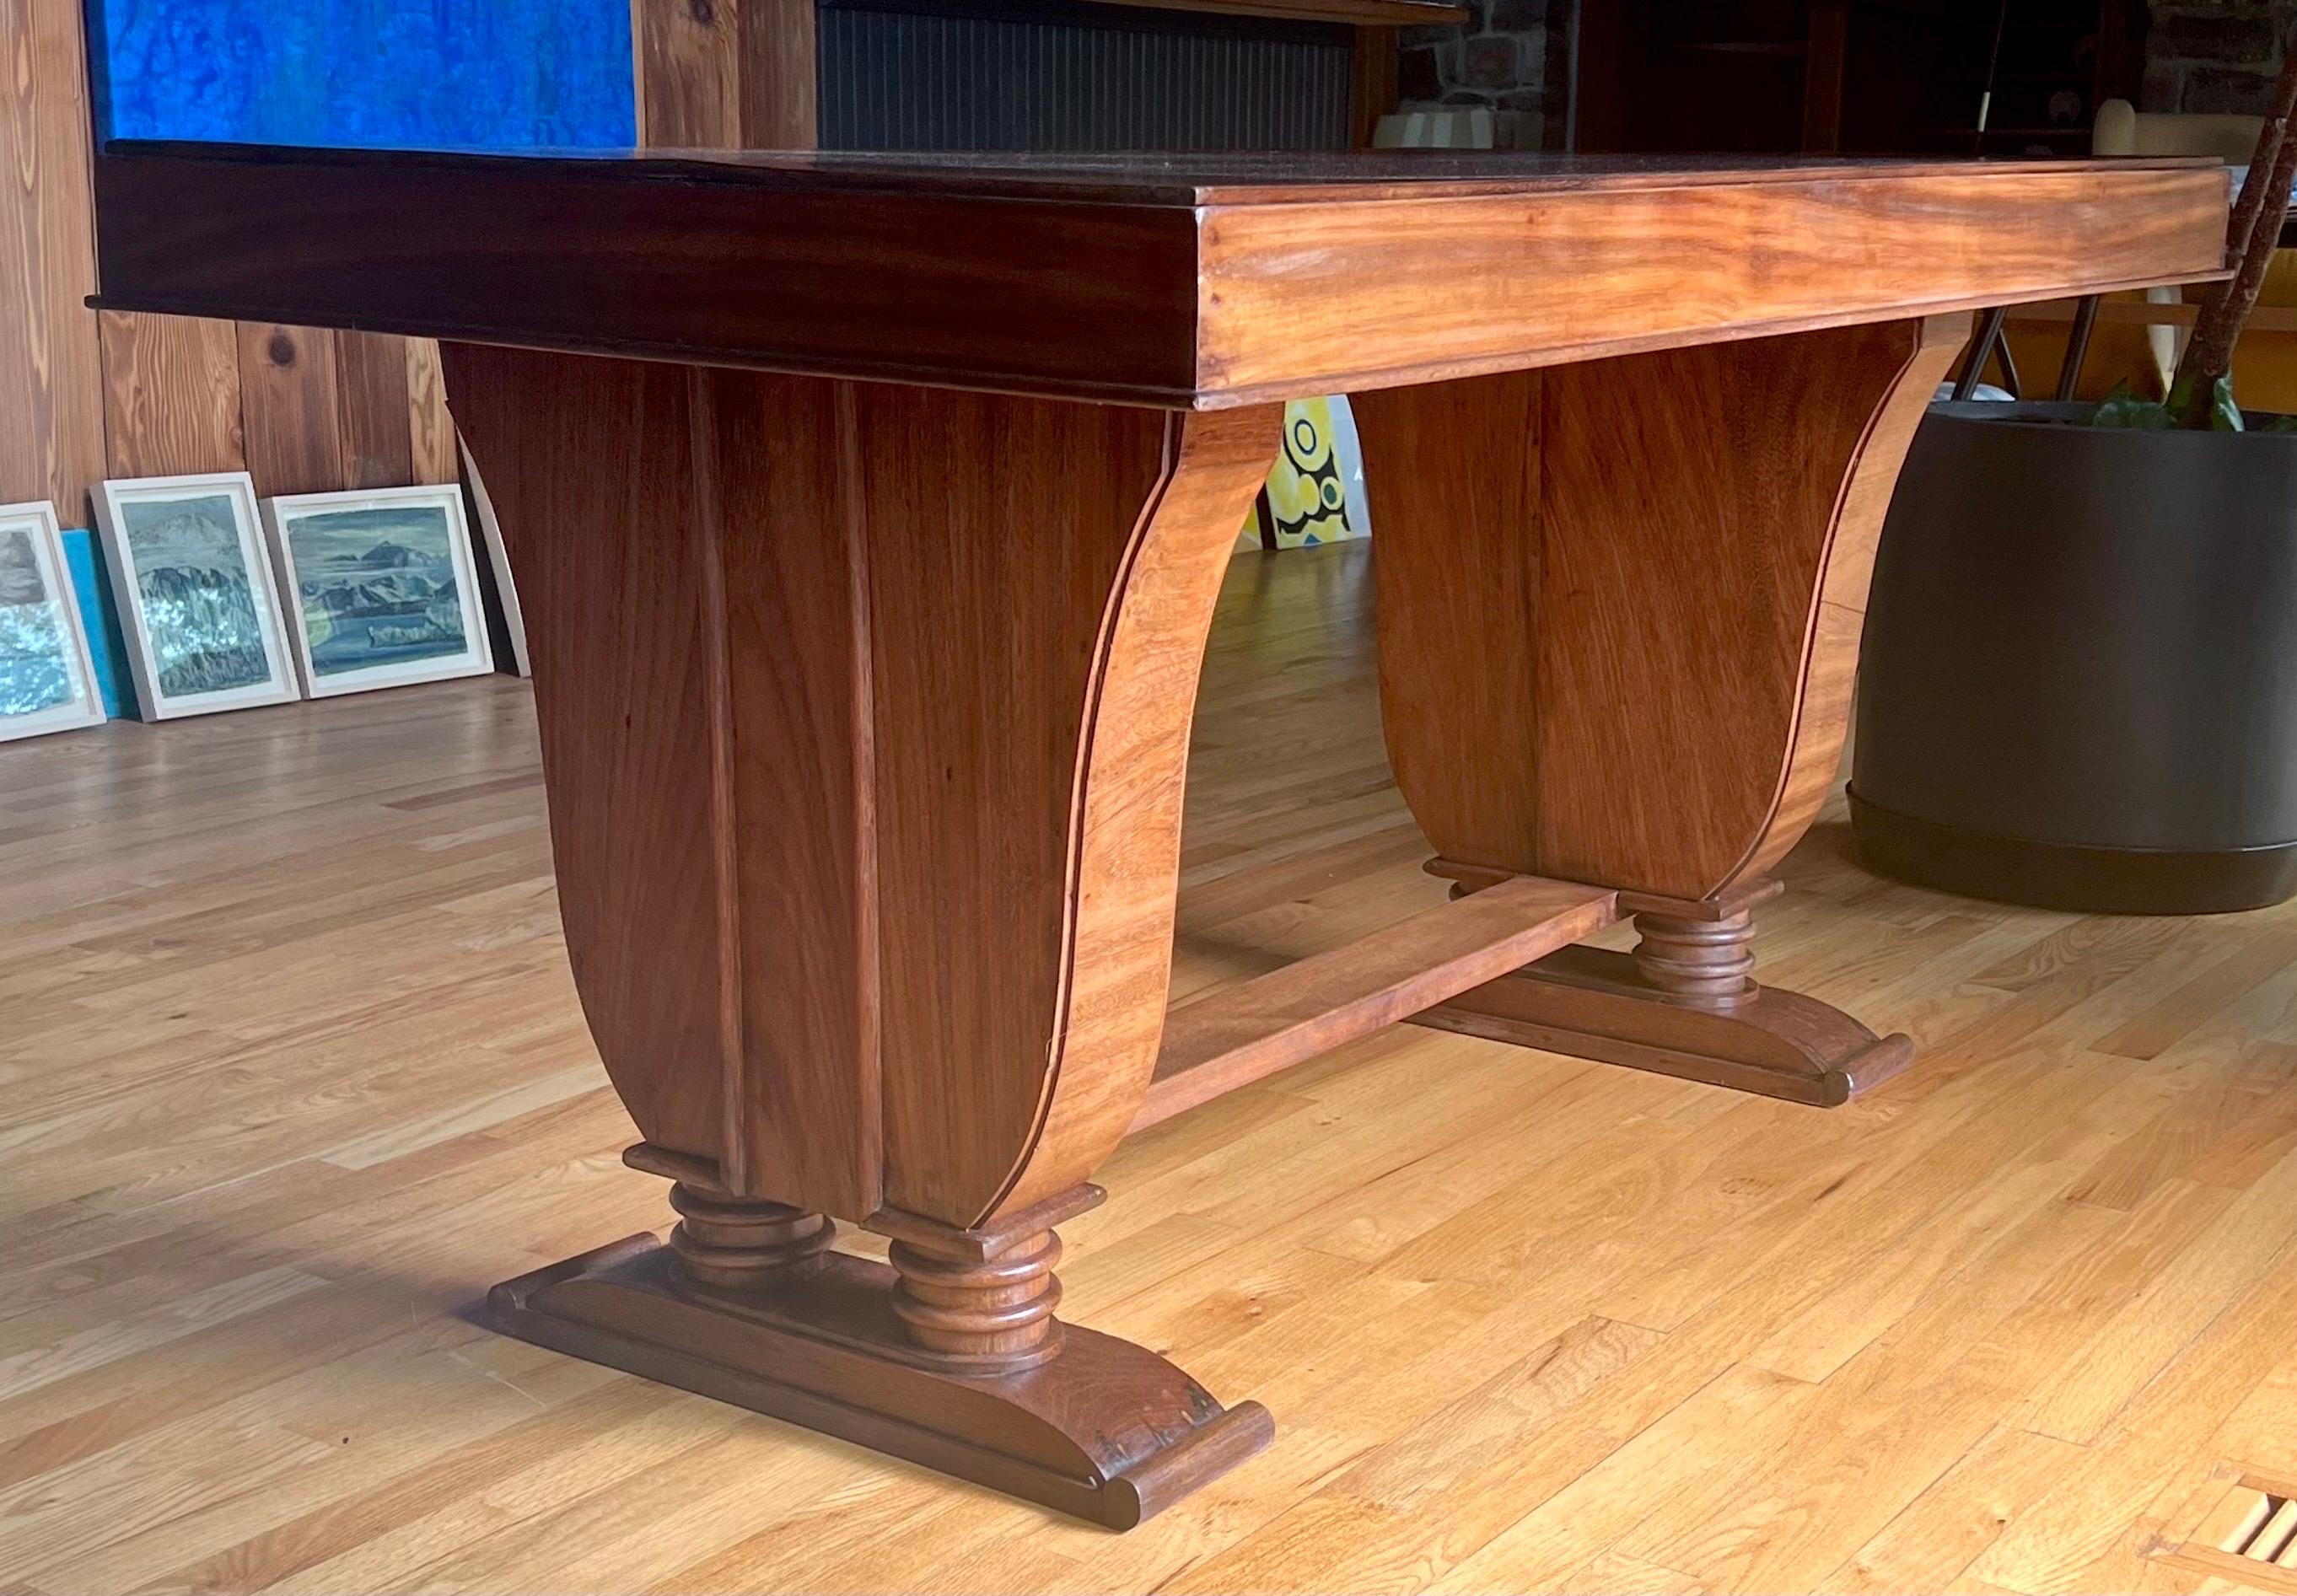 Elegant and Timeless French Art Deco Writing Table / Desk in Teak Wood circa 1925. This rare and original piece has an exquisite sense of line, form and volume that creates a dramatic, yet subtle presence. The design and construction of this work is